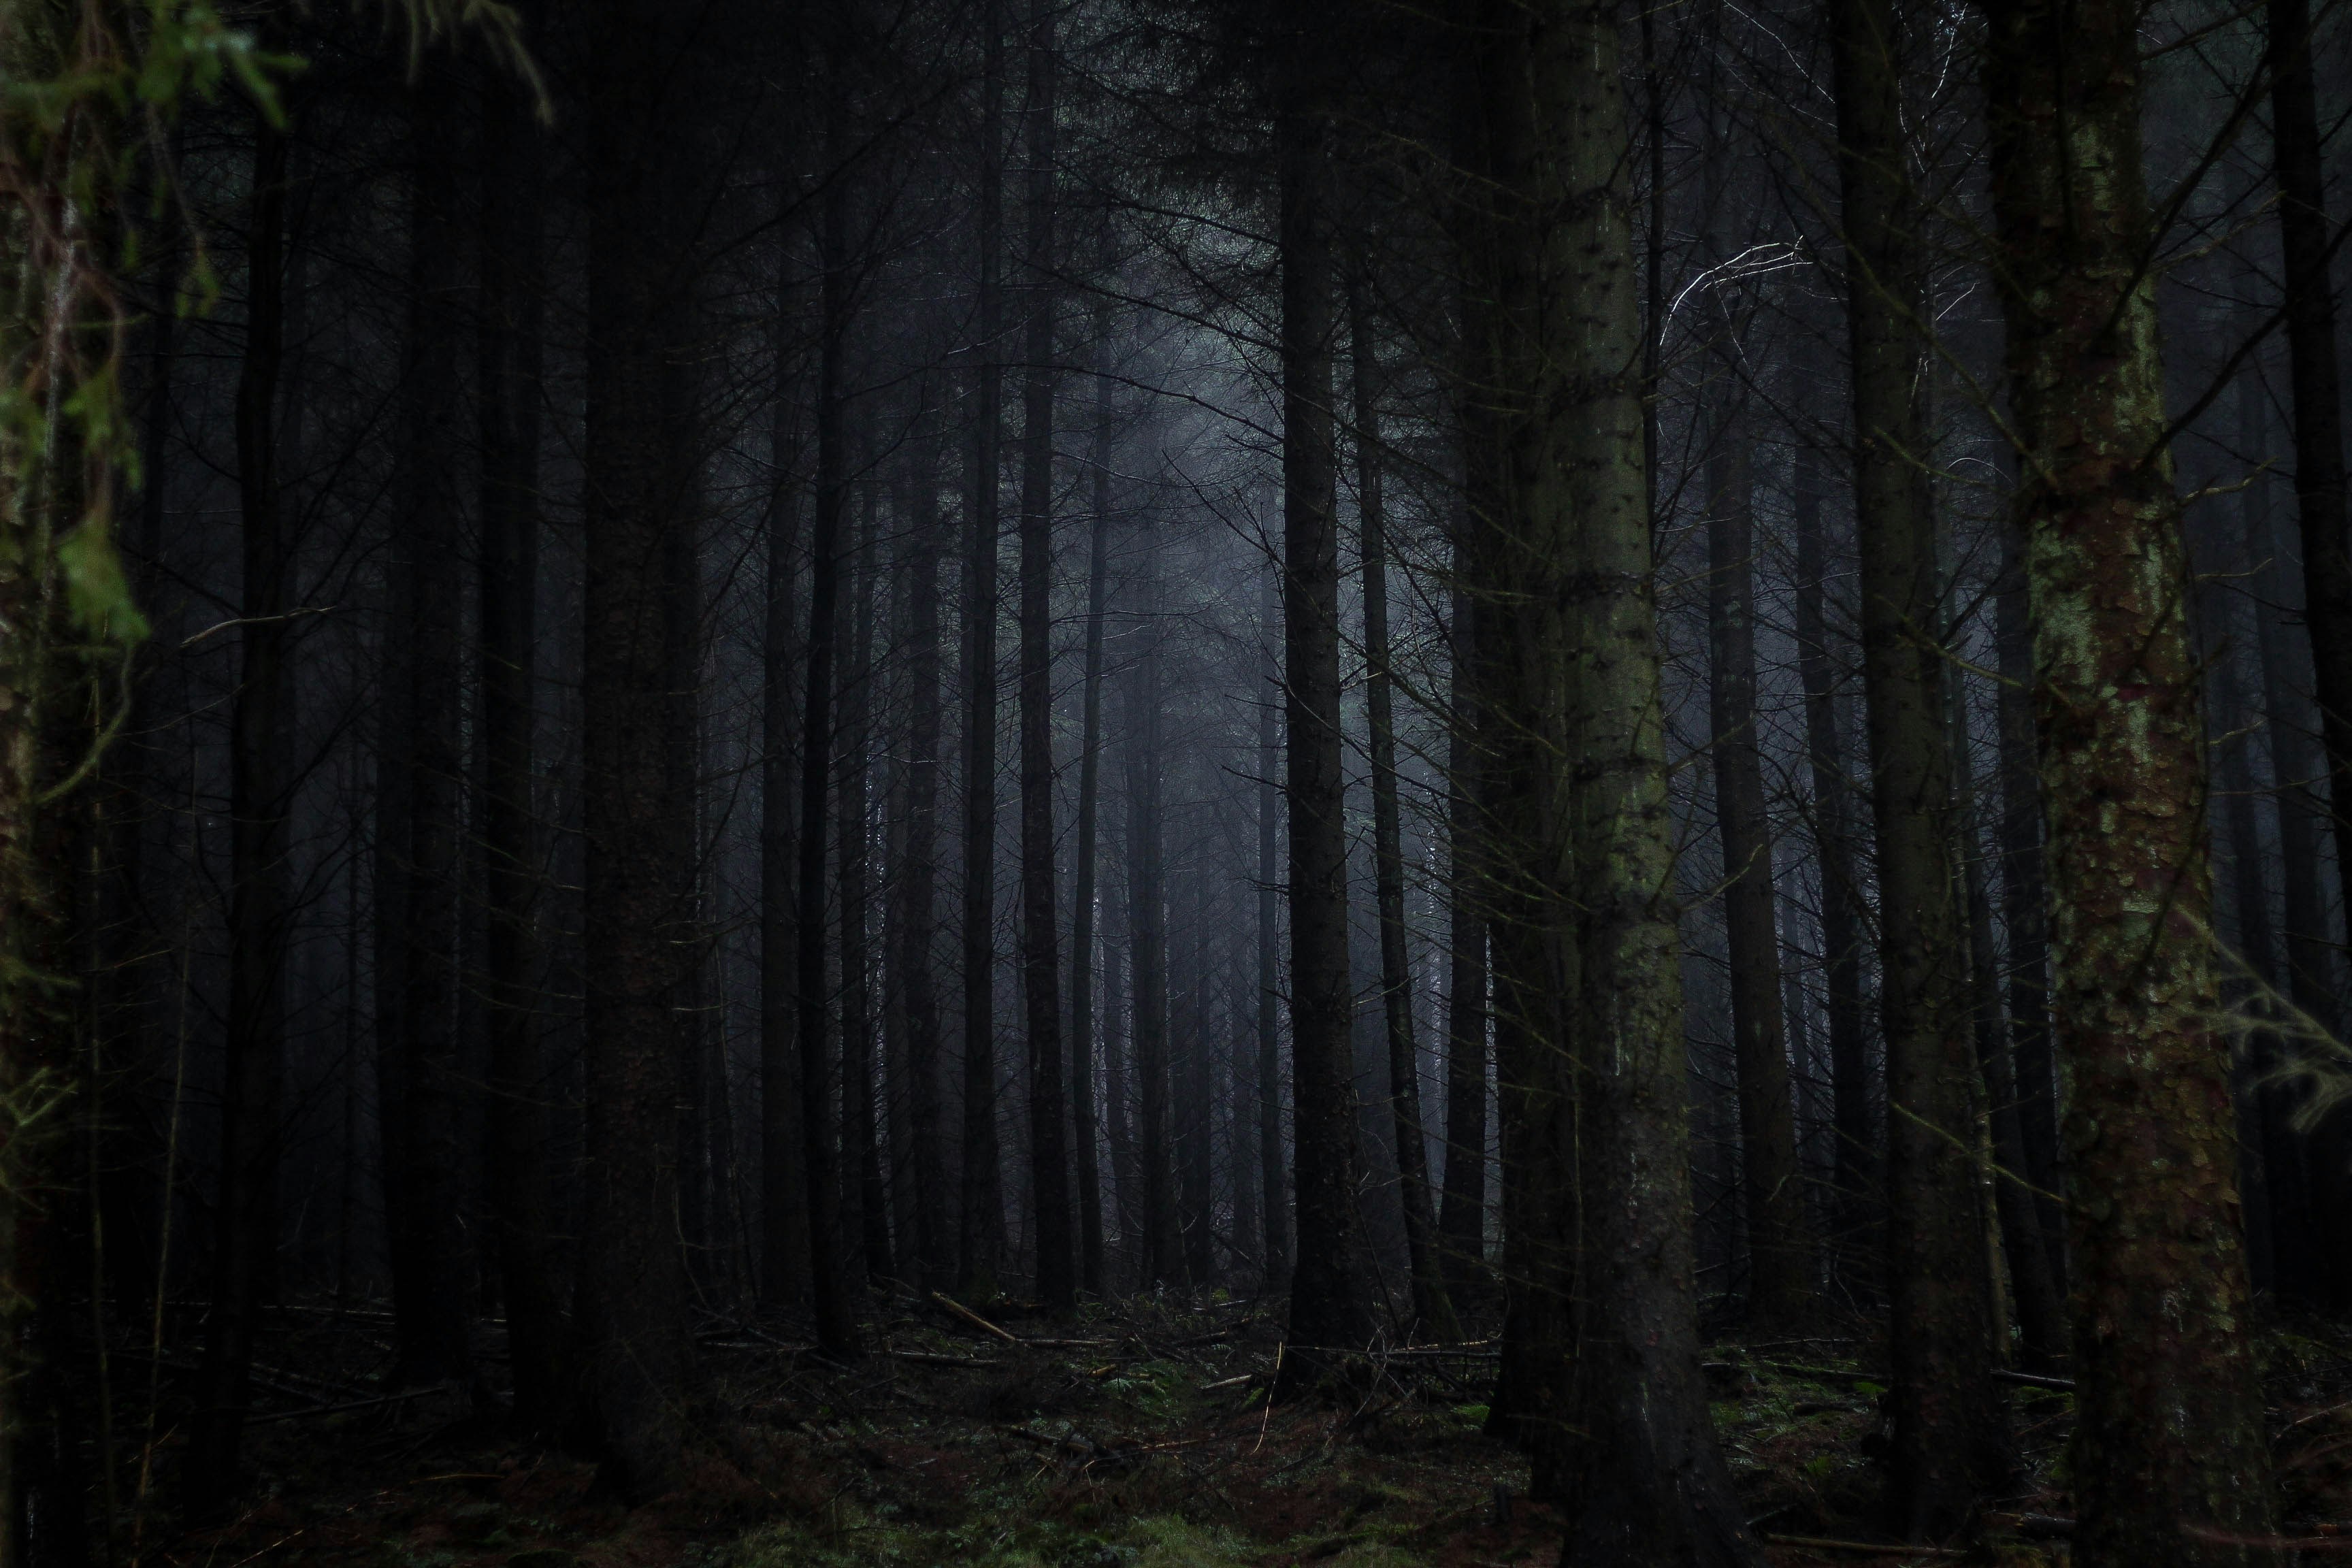 I love forests and were long due a trip so we went to Dalby forest in Yorkshire. The mist fell as we arrived and got this beautiful eerie image that reminded us of the forbidden forest in Harry Potter!